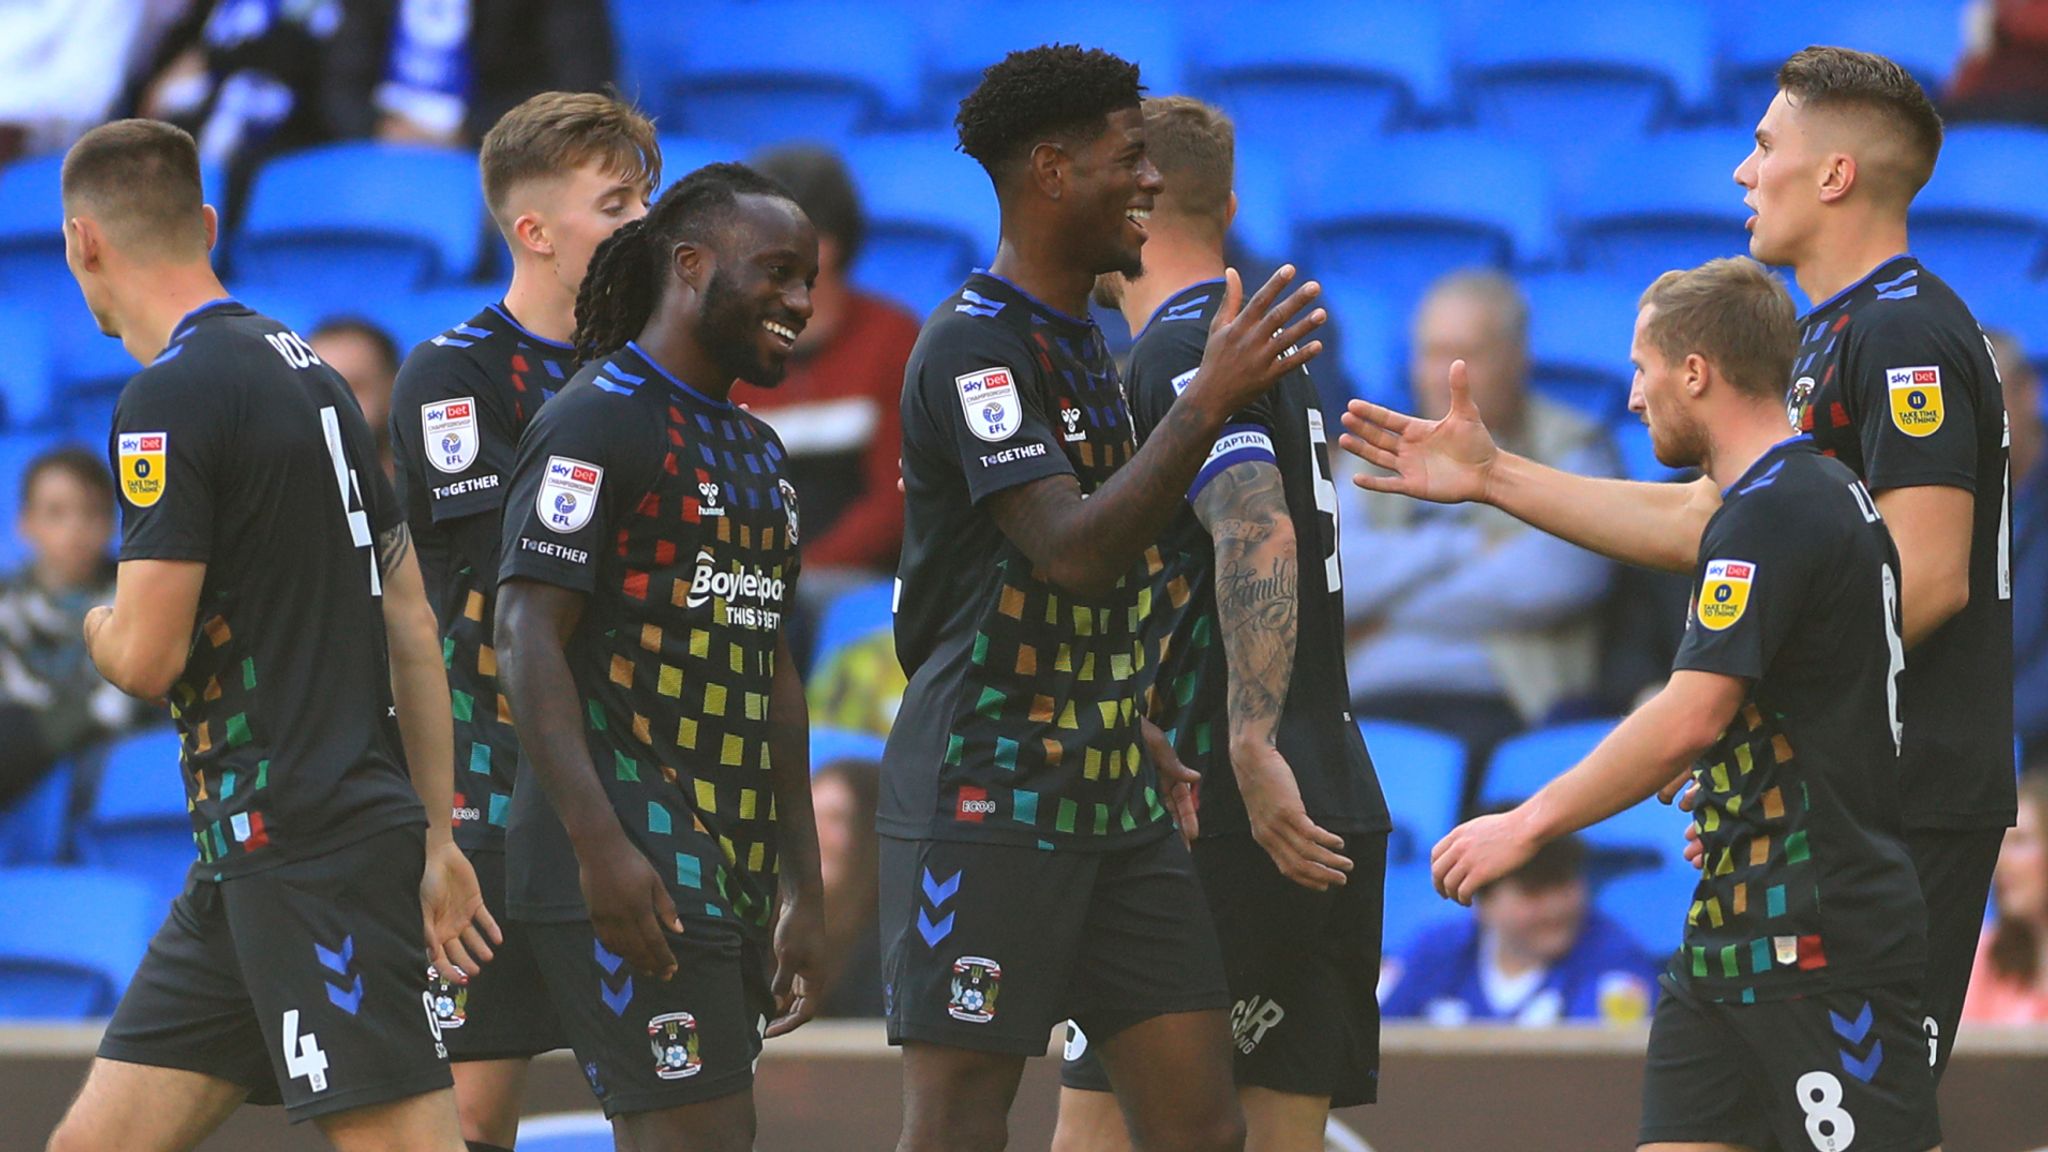 Cardiff City vs Coventry City on 19 Sep 23 - Match Centre